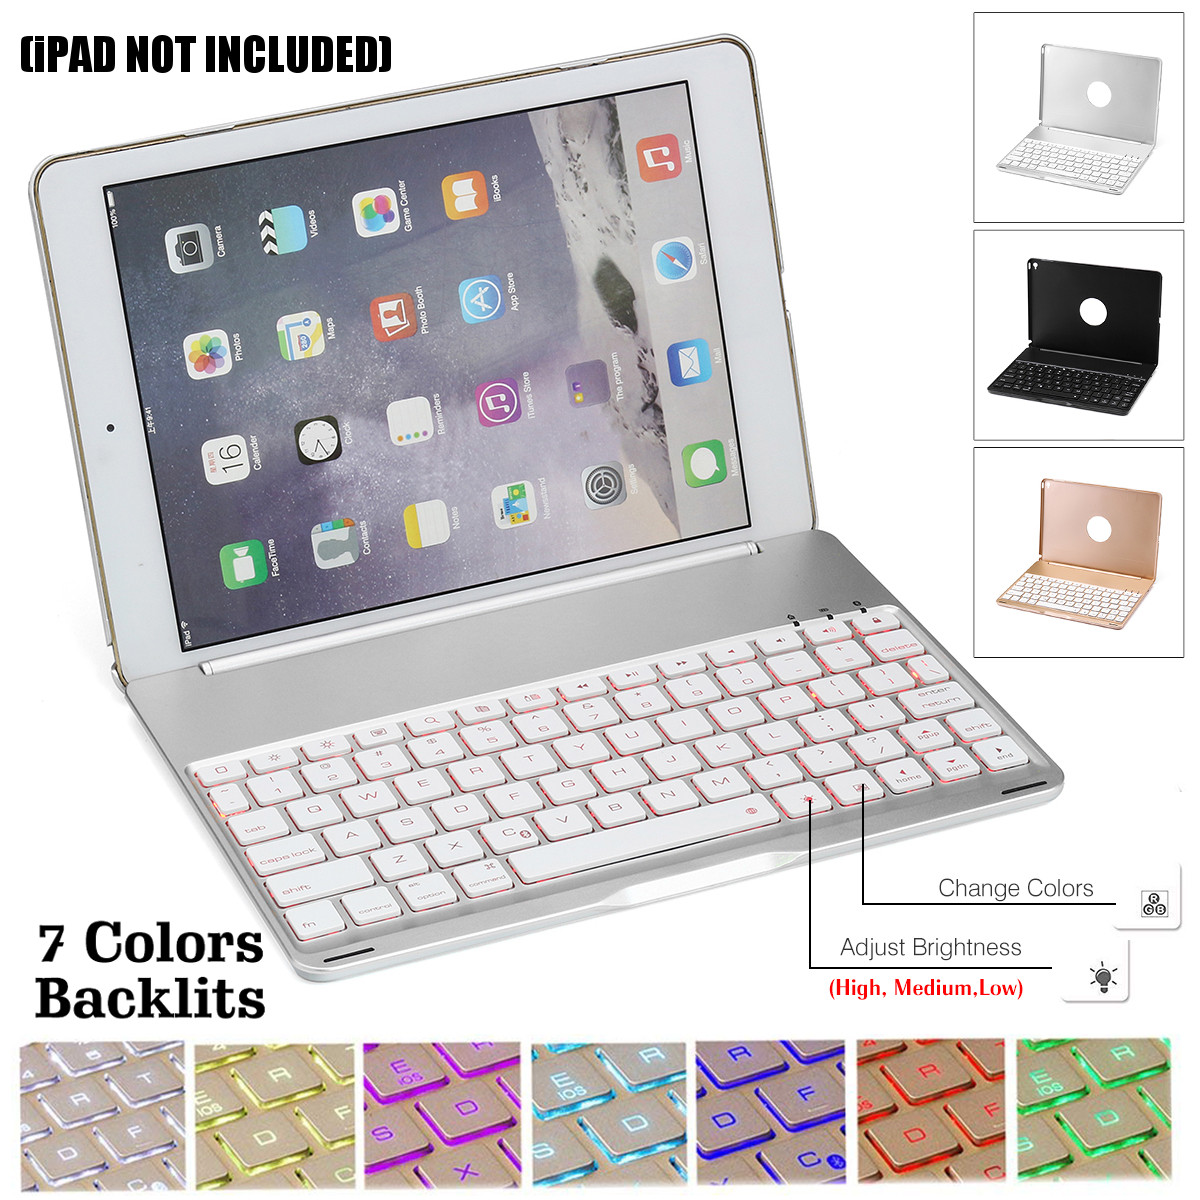 7 Colors Backlit Aluminum Alloy Wireless bluetooth Keyboard Case For iPad Air/iPad Air 2 11